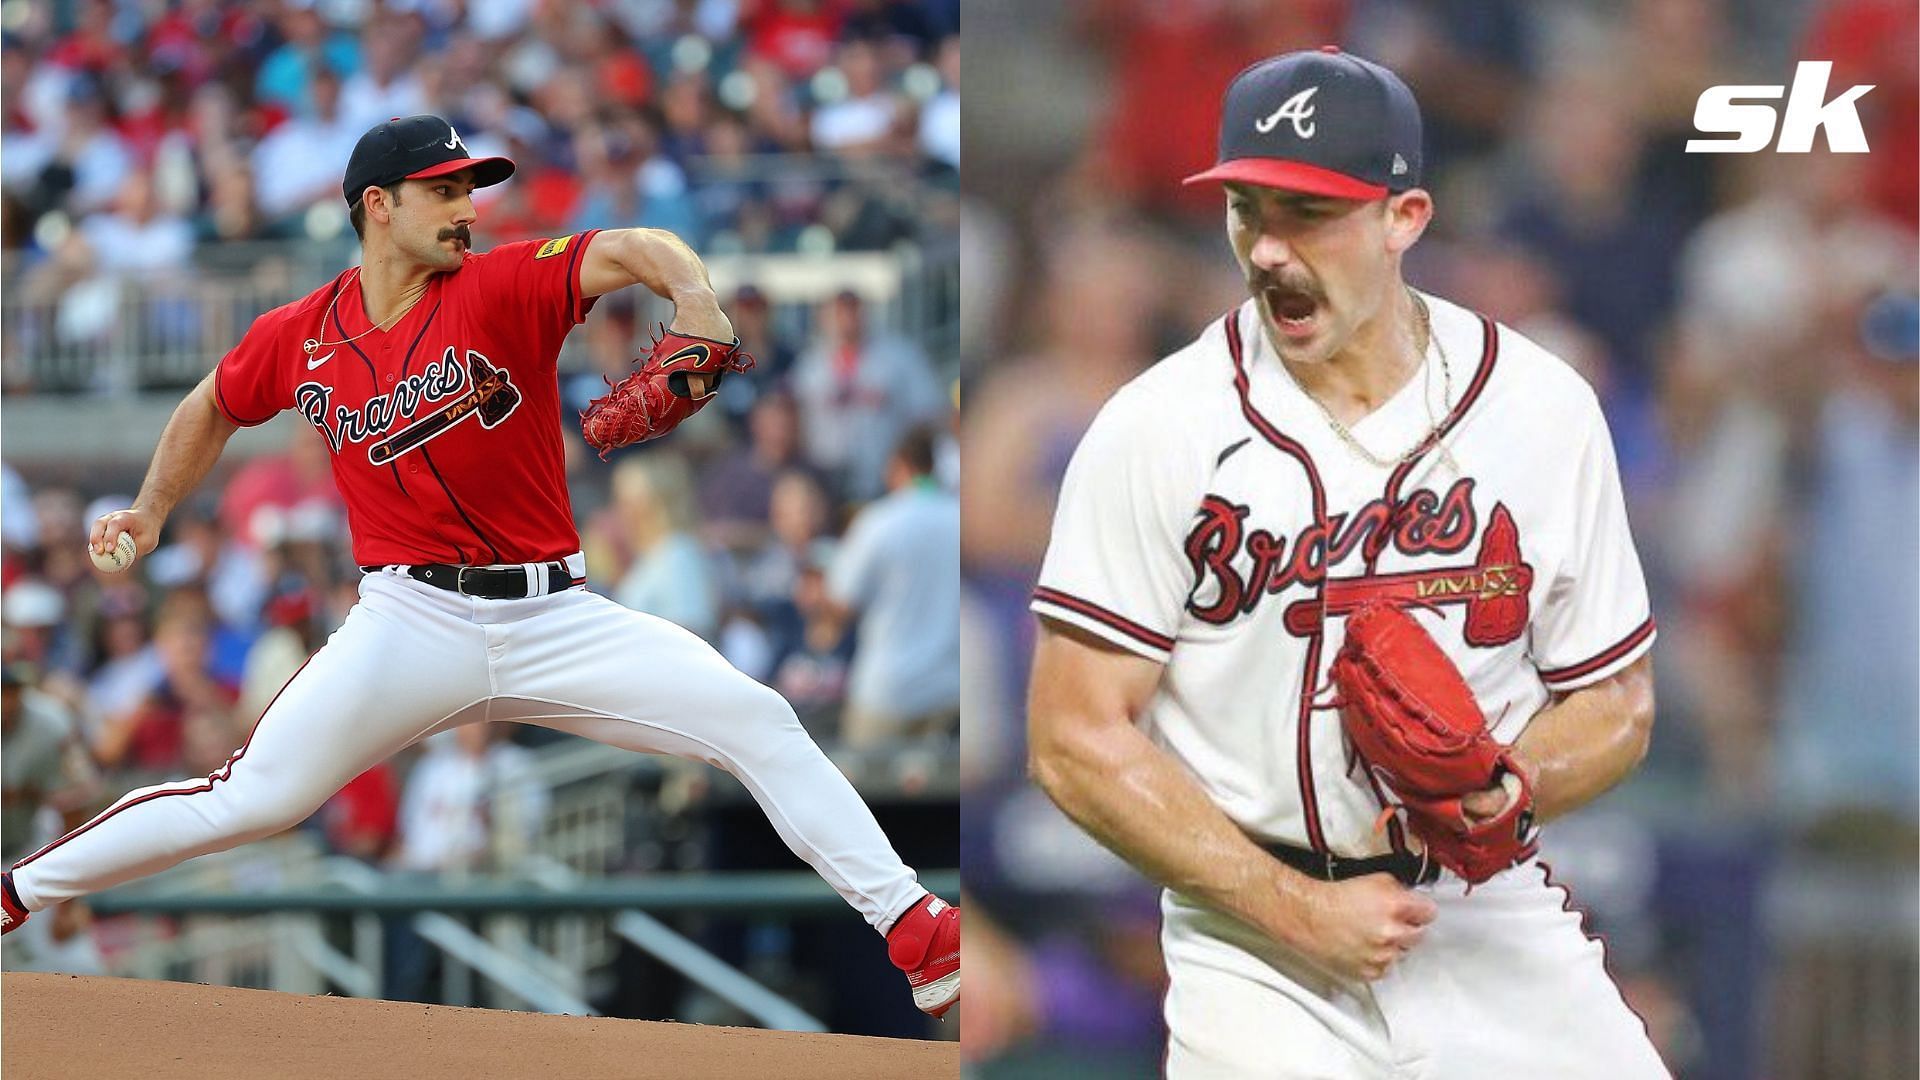 Hall of Famer John Smoltz says that Spencer Strider is ahead of the Braves greats at this point in their careers